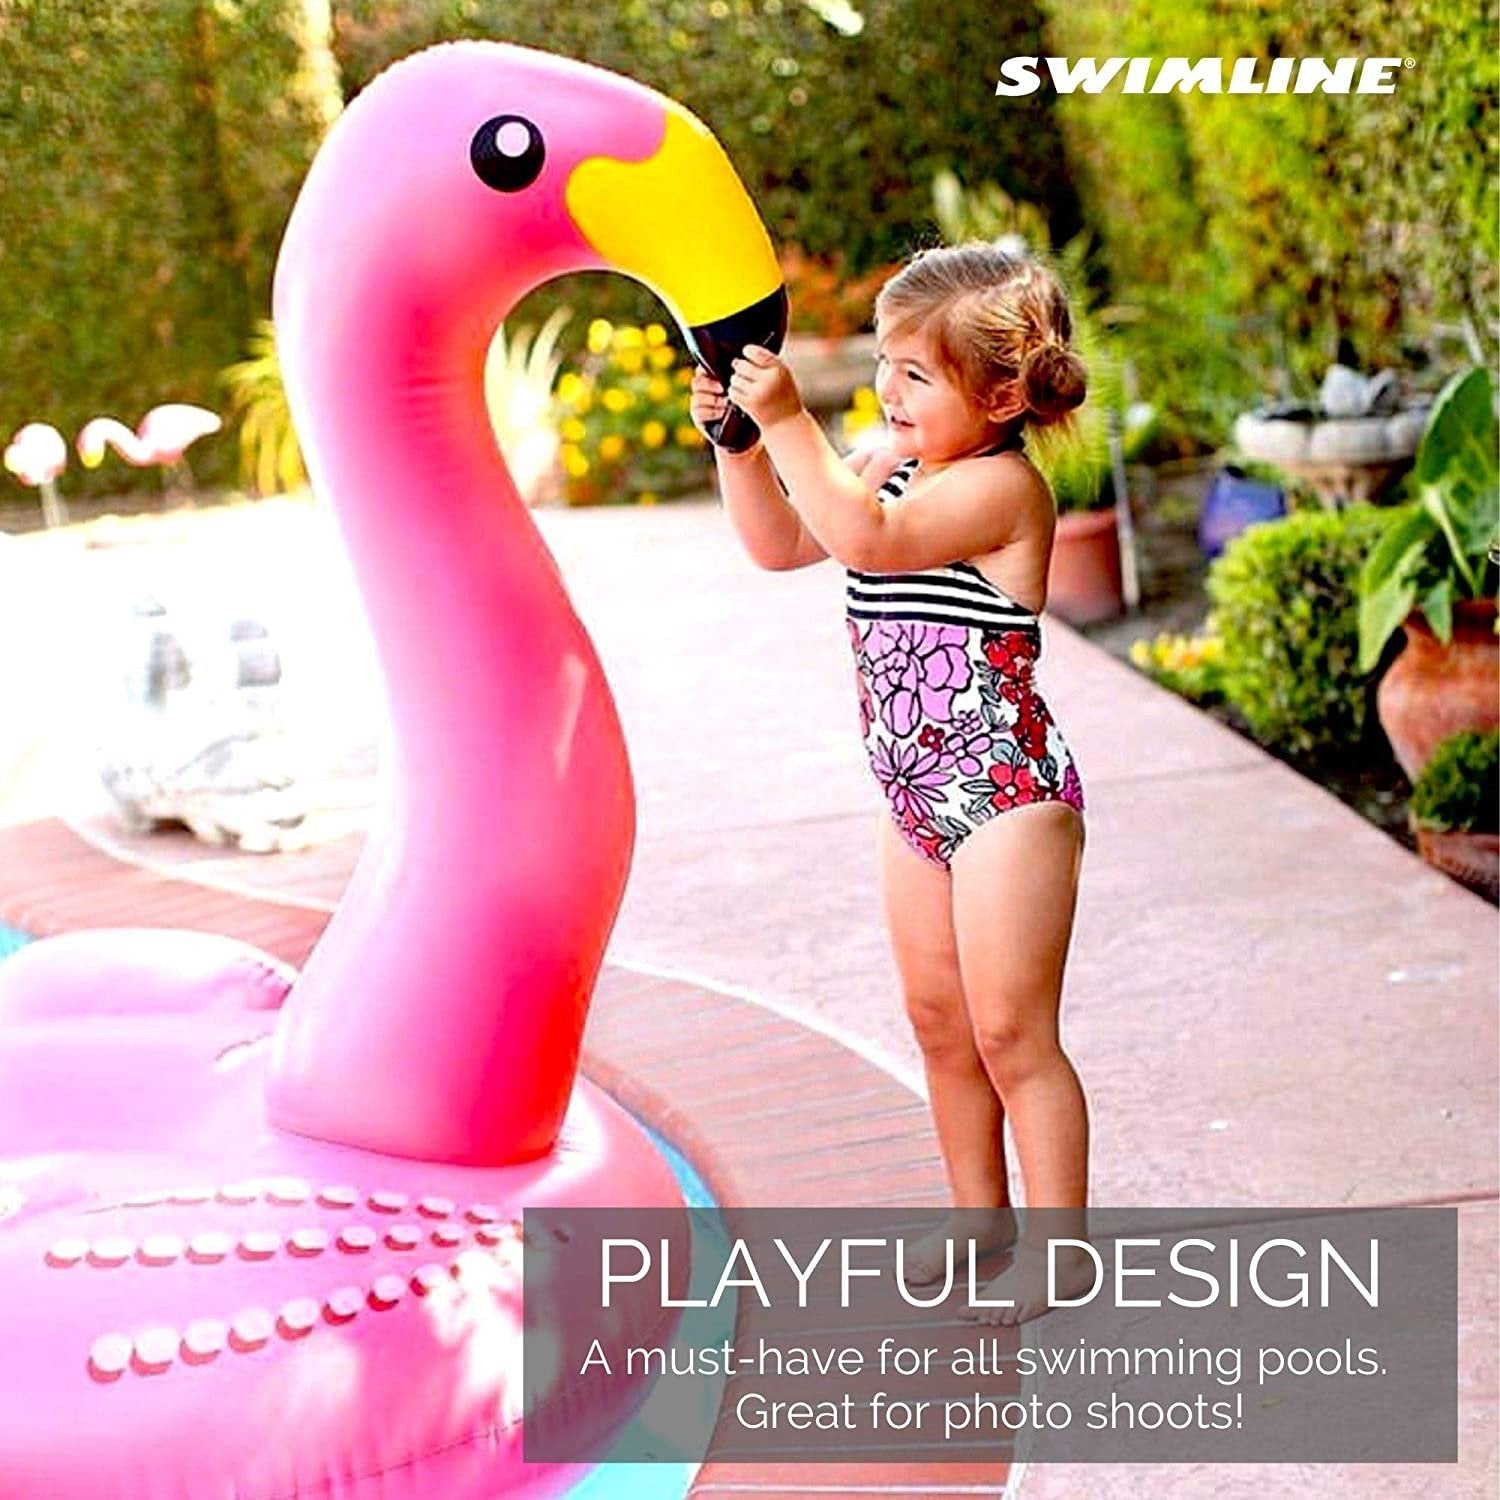 Swimline Giant Flamingo Inflatable Pool Float - Pink, 1-Pack, Size AVAILABLE - Free Shipping